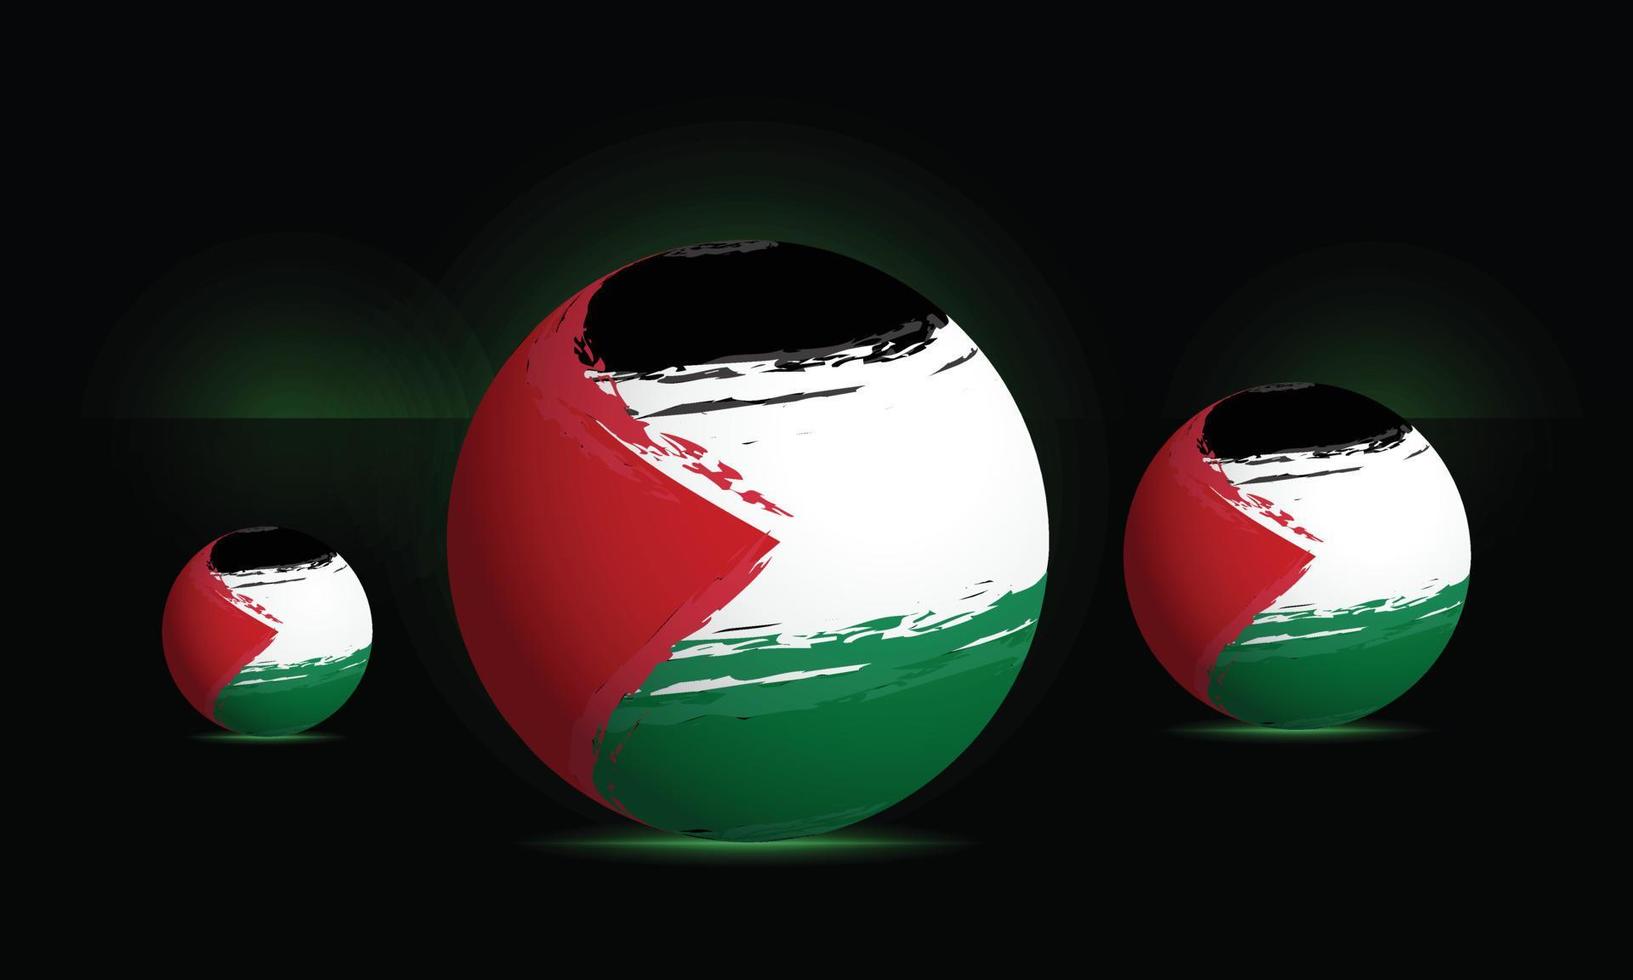 Palestine flag into 3d ball on the lighting stage black Vector background. Free Palestine, Save Gaza, Al Quds, Al Aqsa, Independence